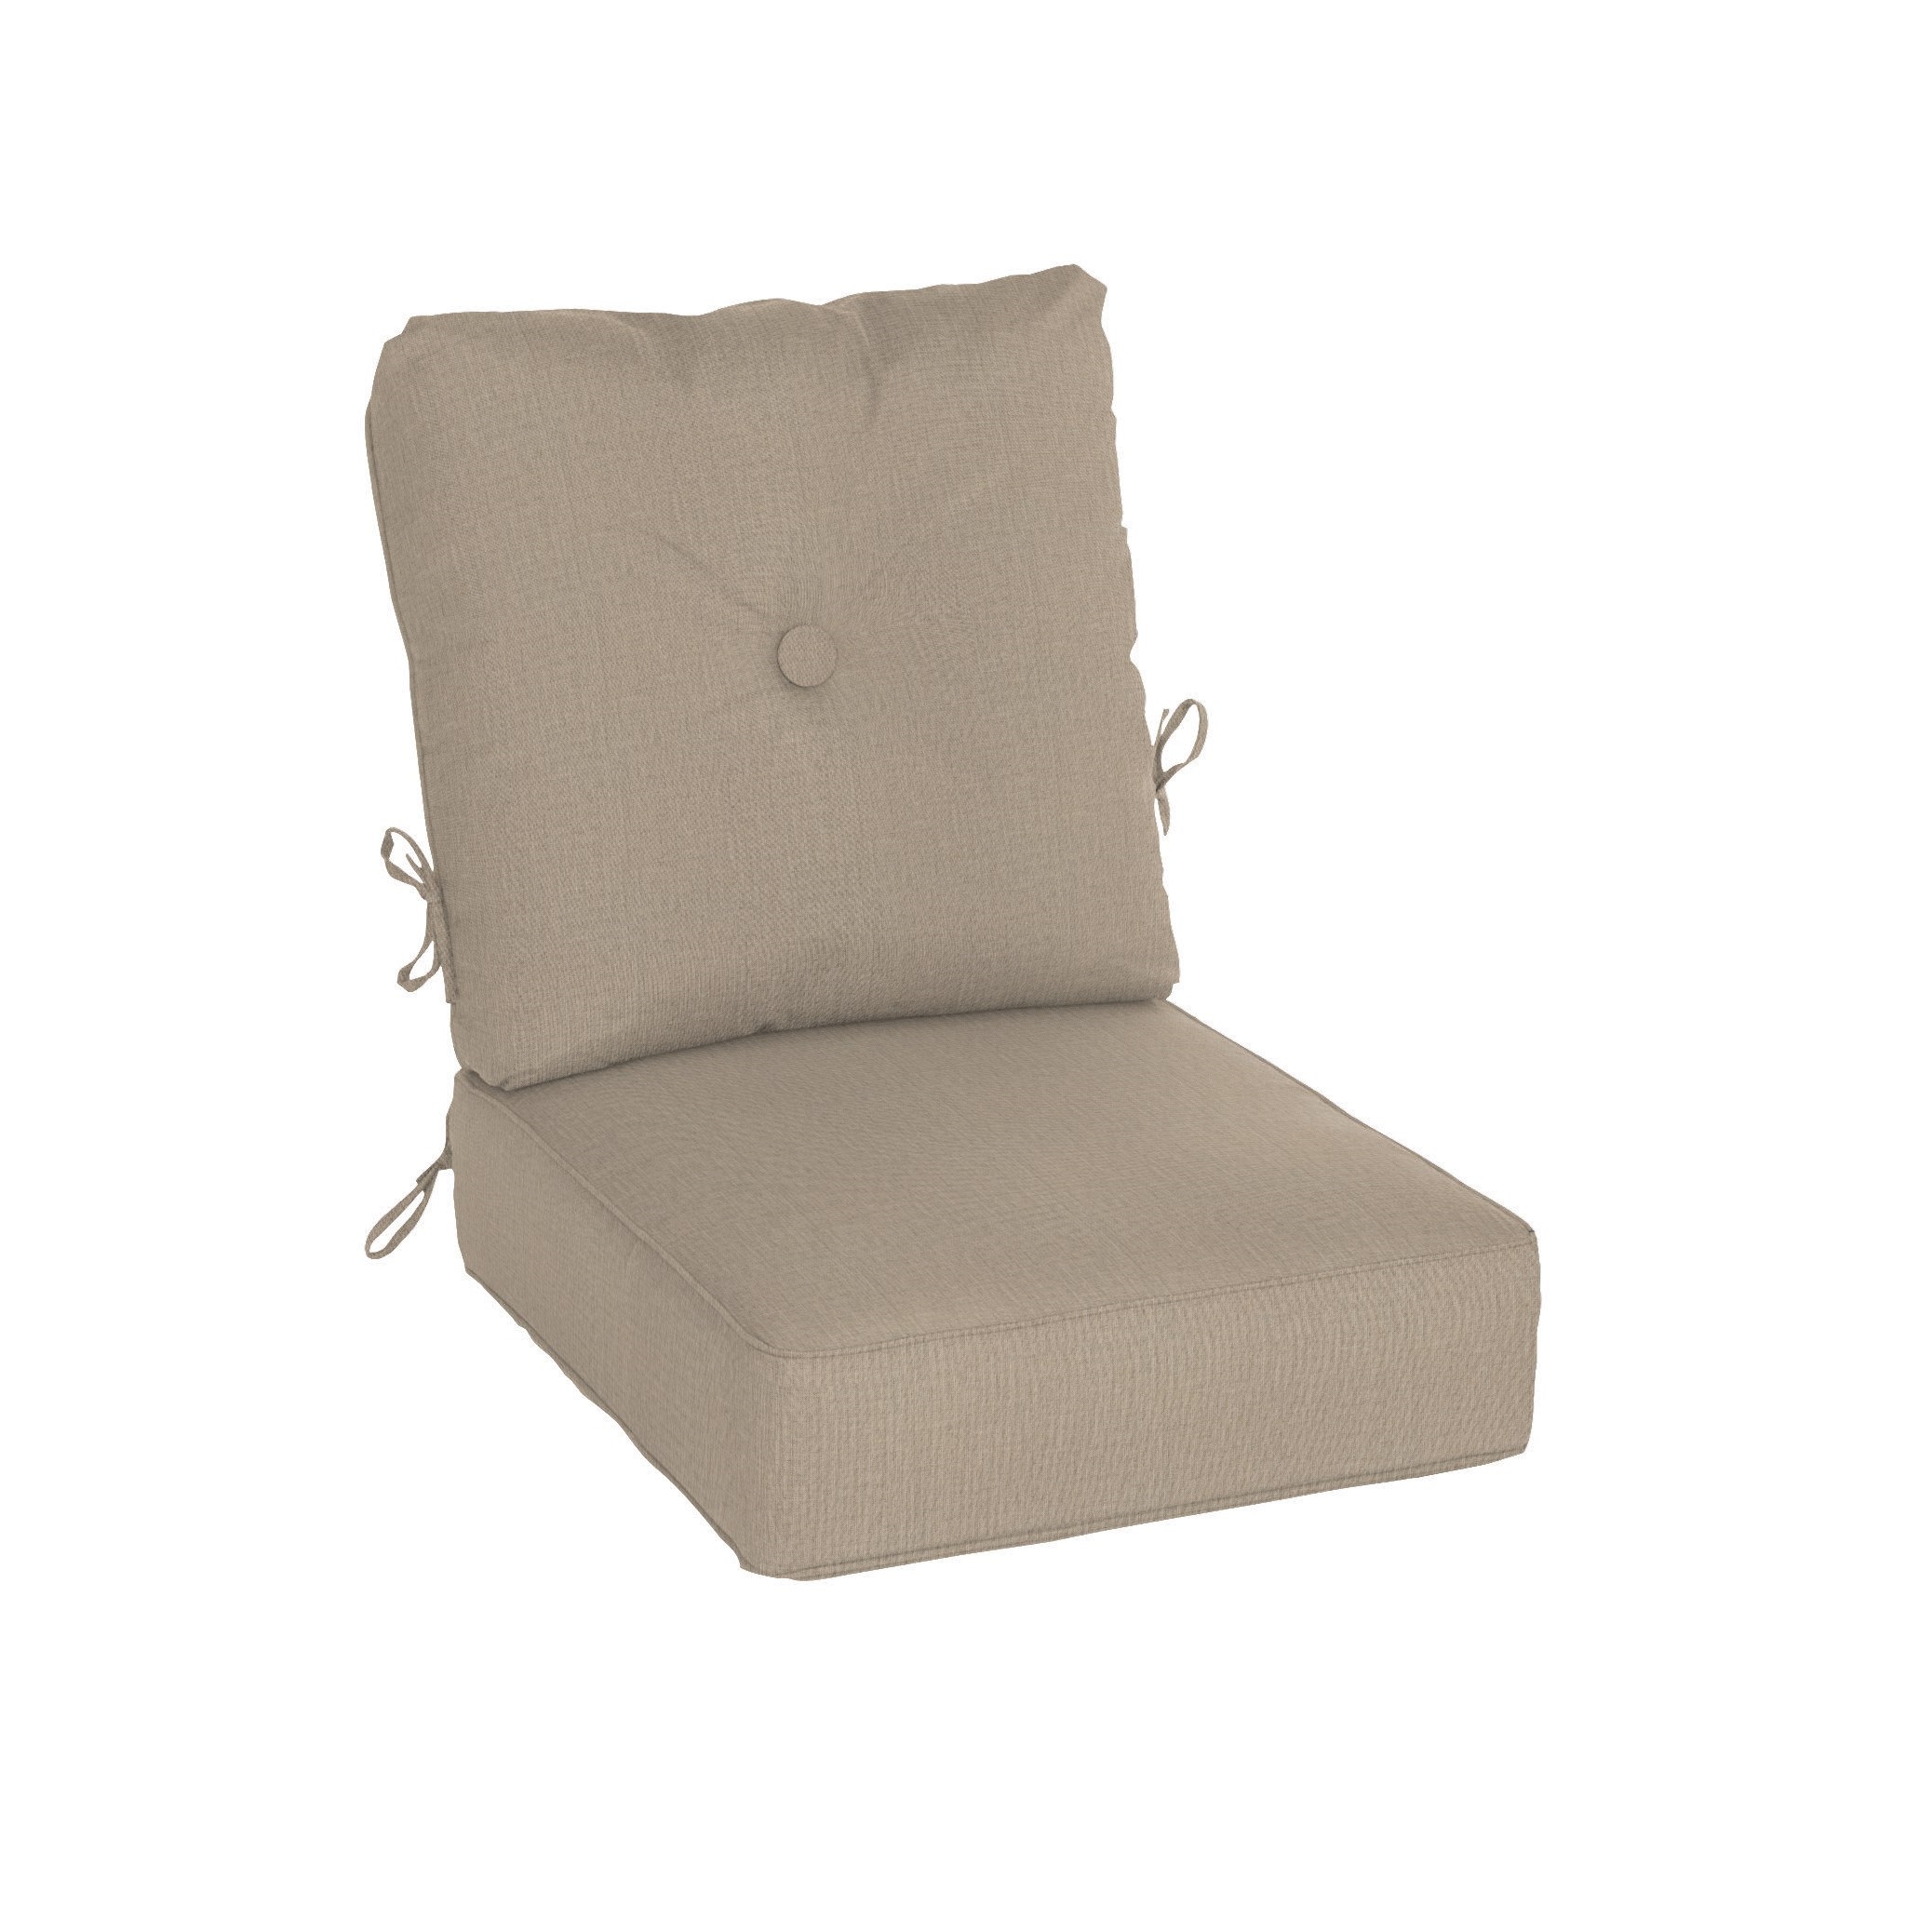 cast ash water resistant estate chair cushion product image